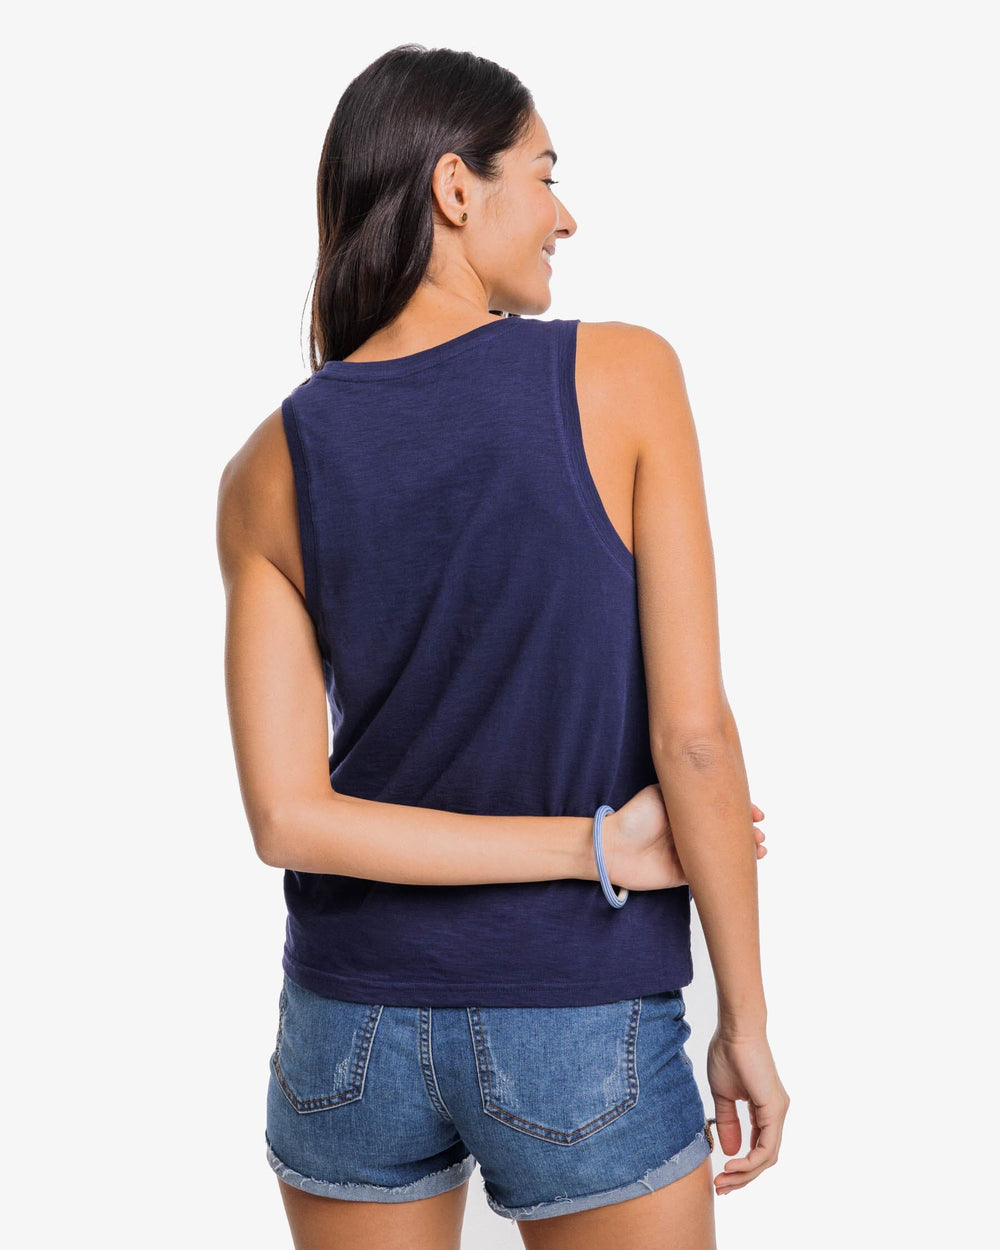 The back view of the Southern Tide Avah Sun Farer Tank by Southern Tide - Nautical Navy